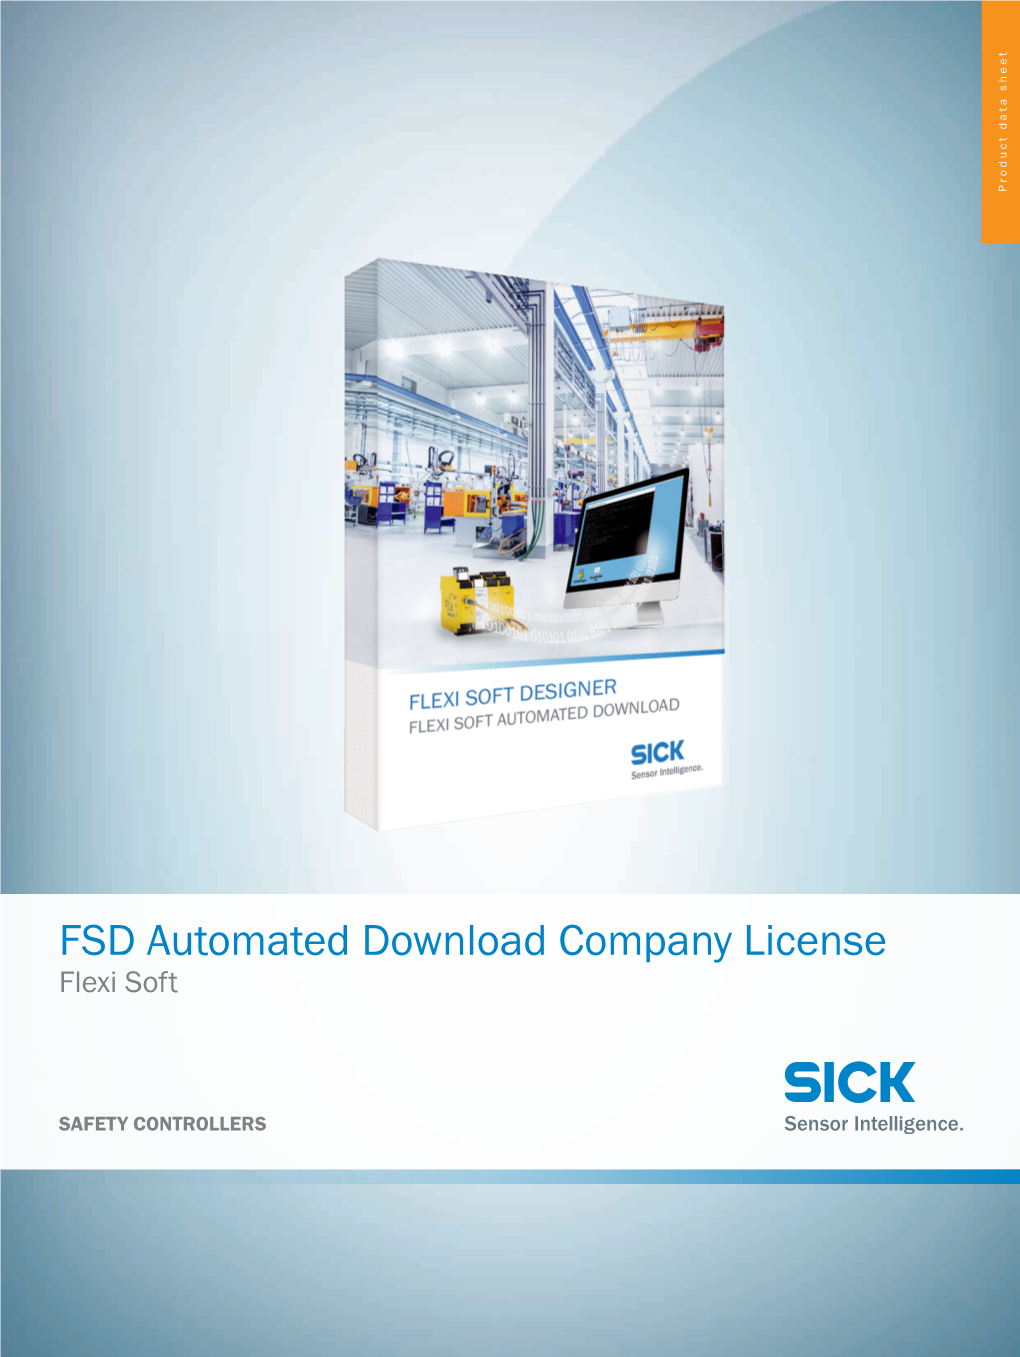 Flexi Soft FSD Automated Download Company License, Product Data Sheet